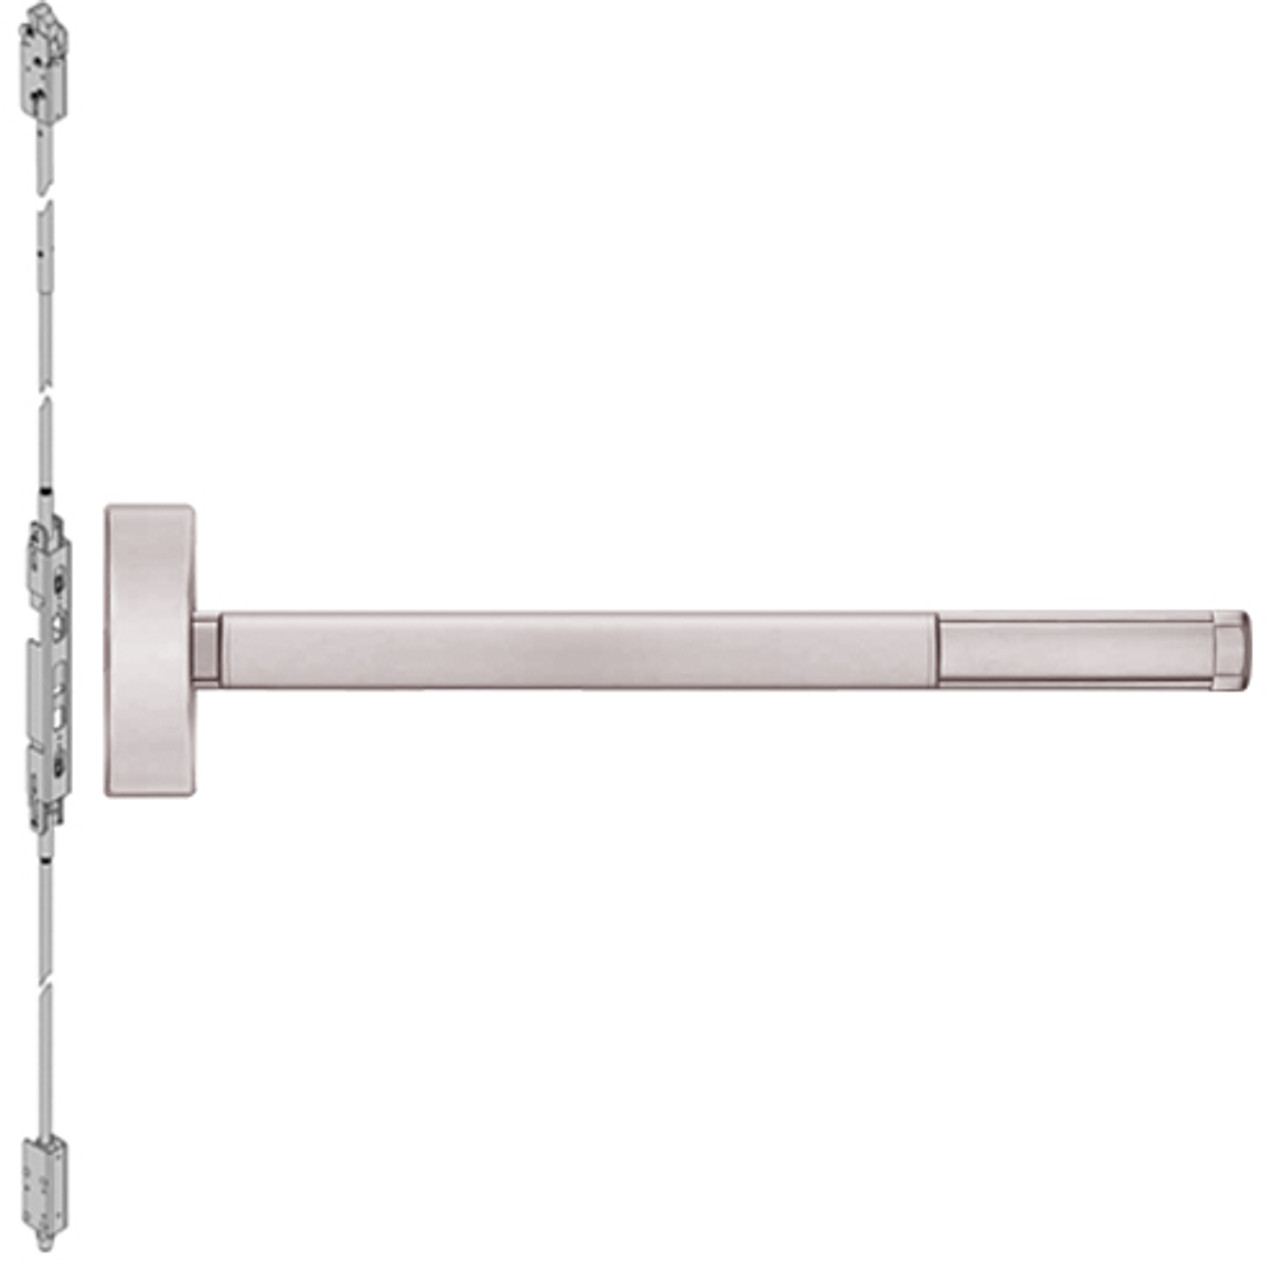 2802LBR-628-48 PHI 2800 Series Non Fire Rated Concealed Vertical Rod Exit Device Prepped for Dummy Trim in Satin Aluminum Finish